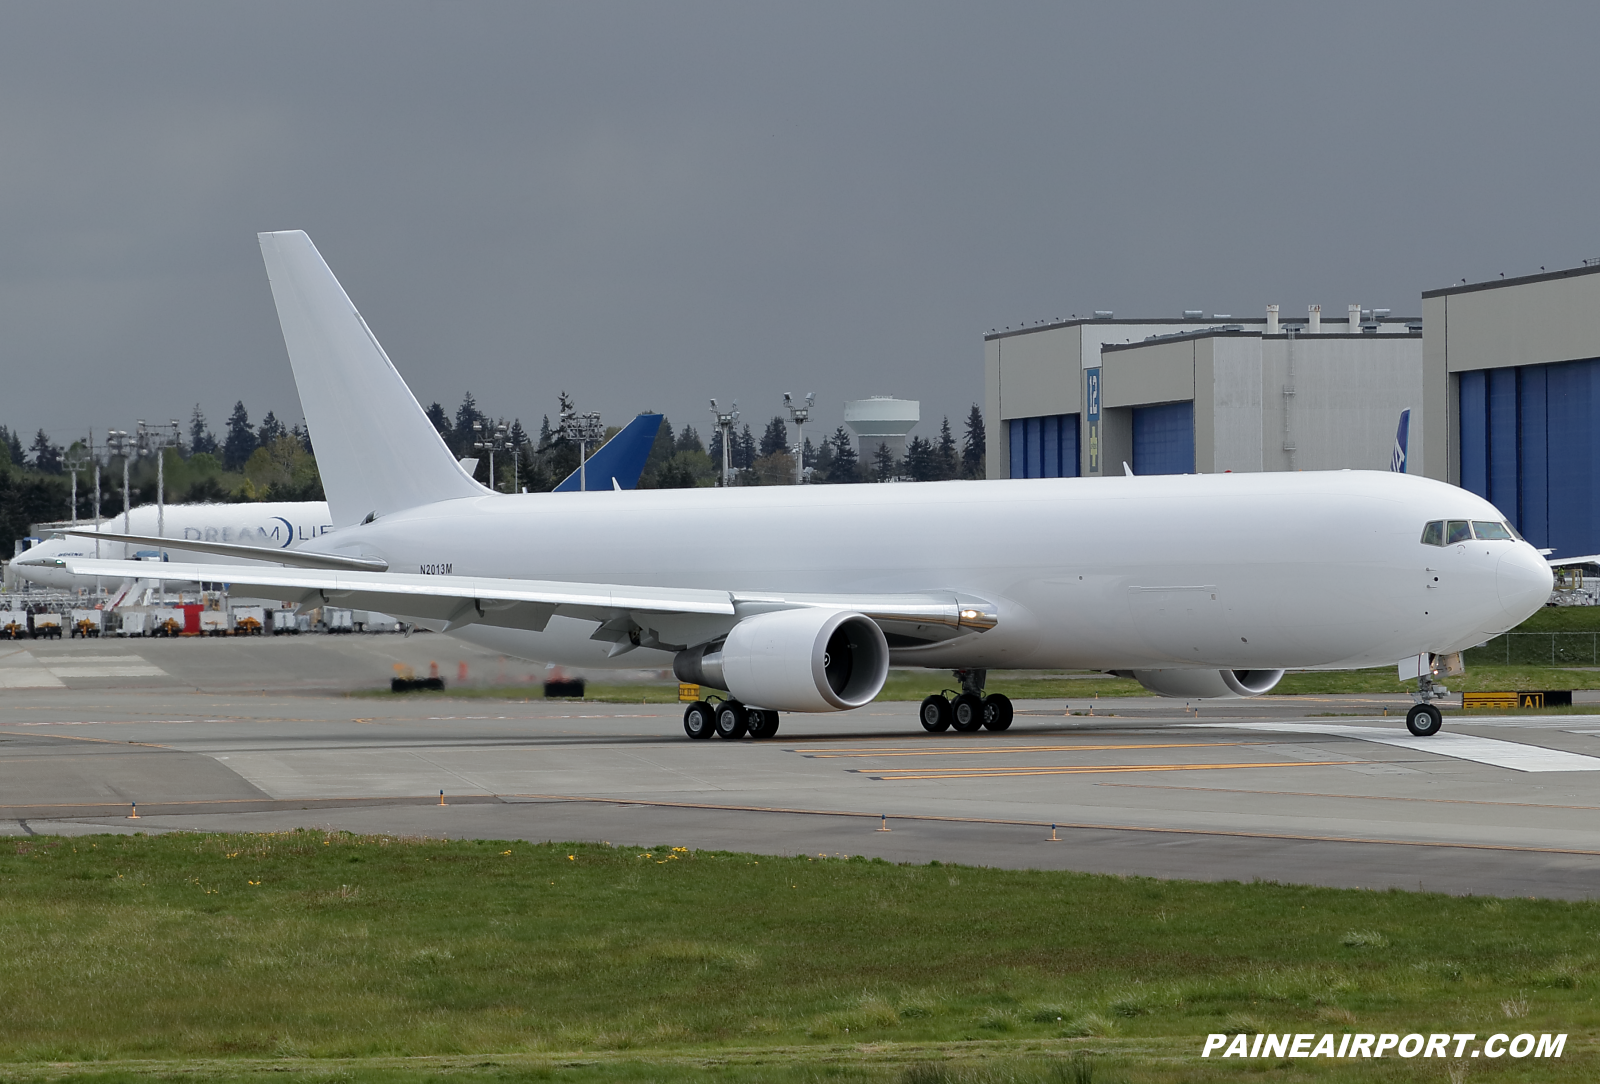 VT734 767 line 1270 at KPAE Paine Field